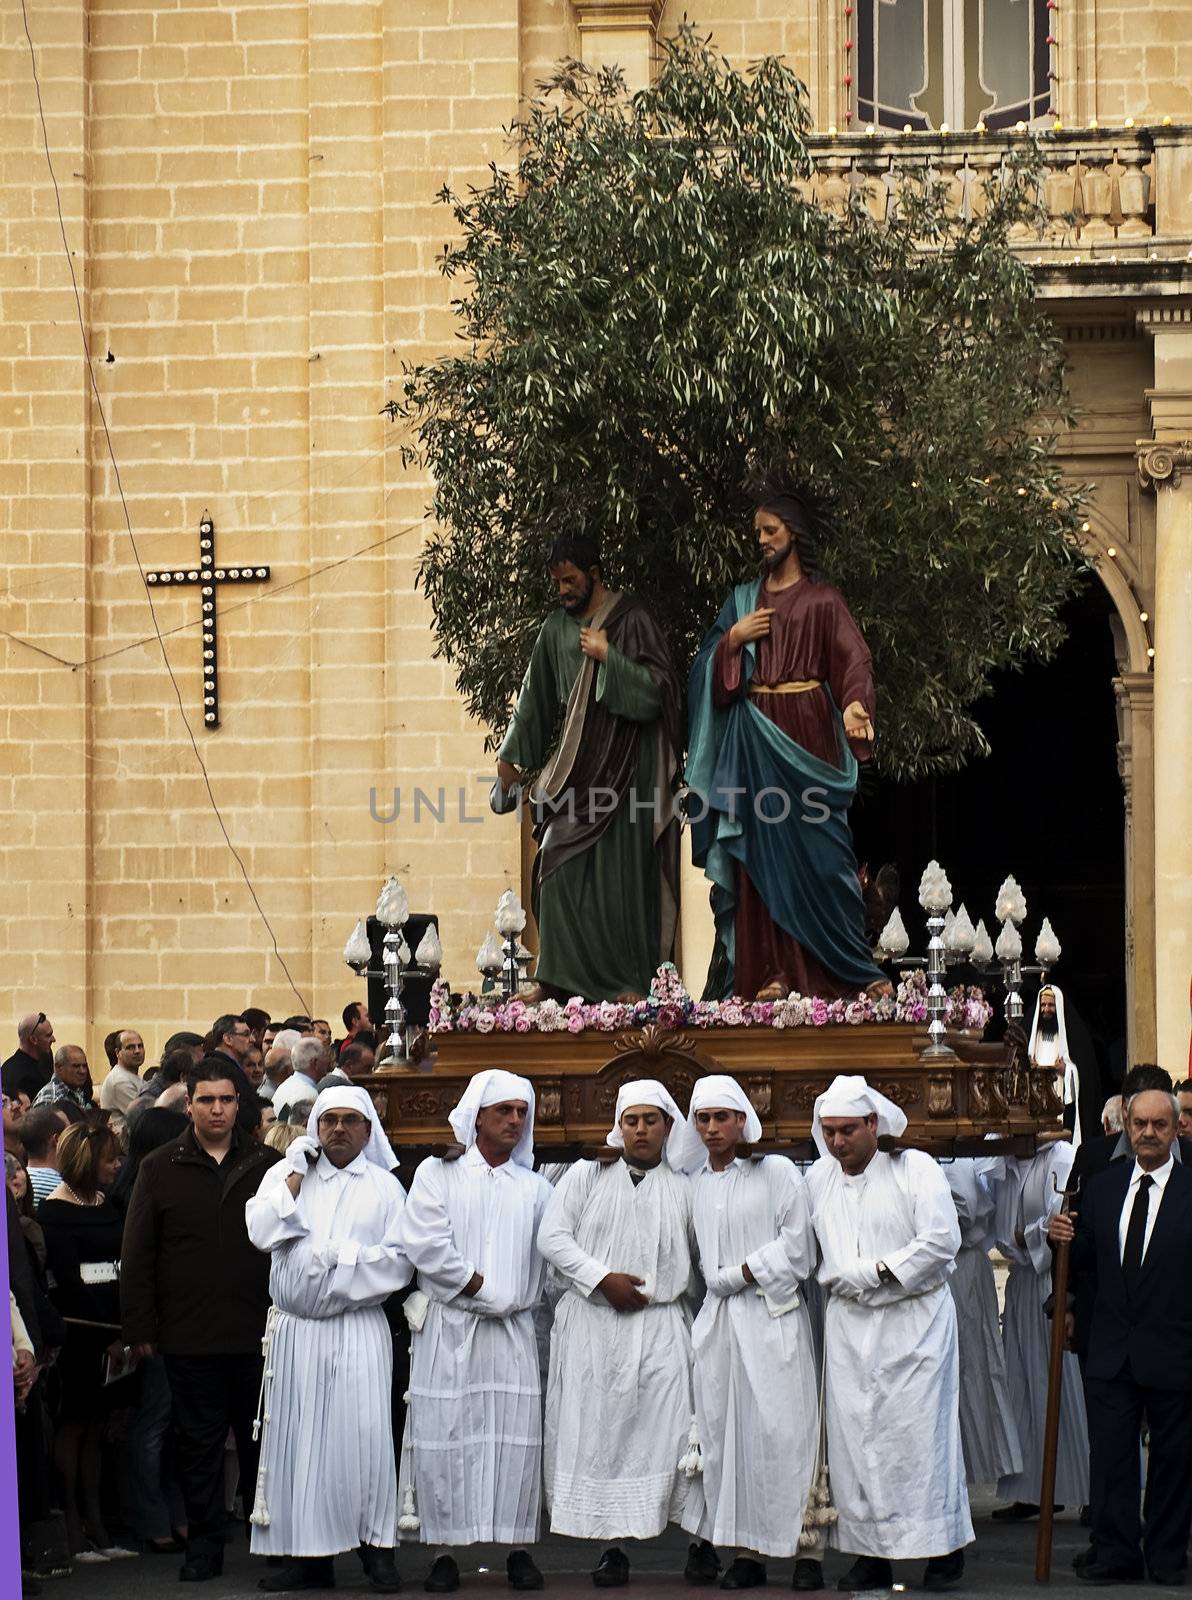 LUQA, MALTA - APR10 - Biblical enactment of the passion during the Good Friday procession in Malta April 10, 2009